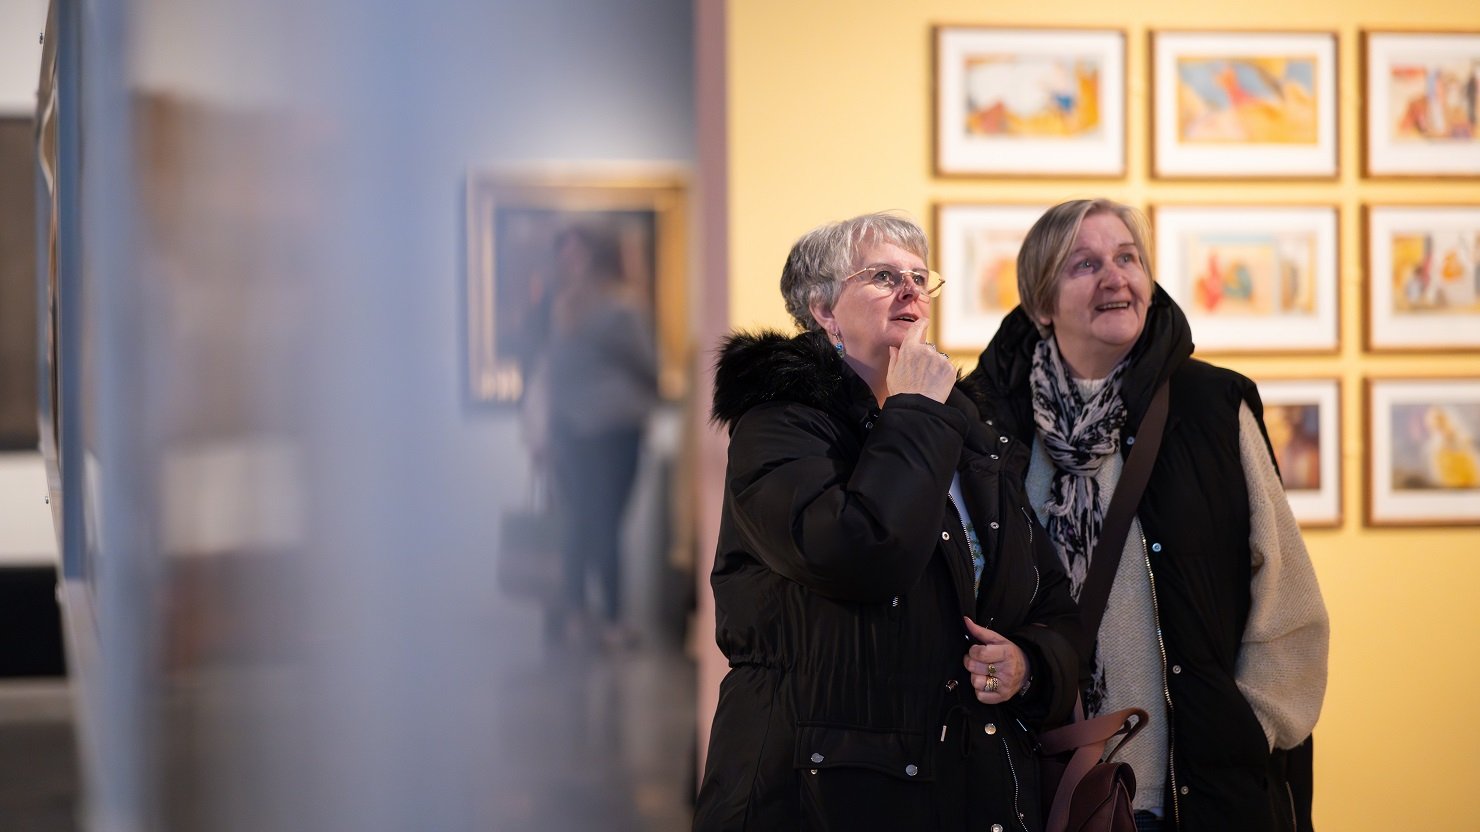 Two women looking at an art exhibition